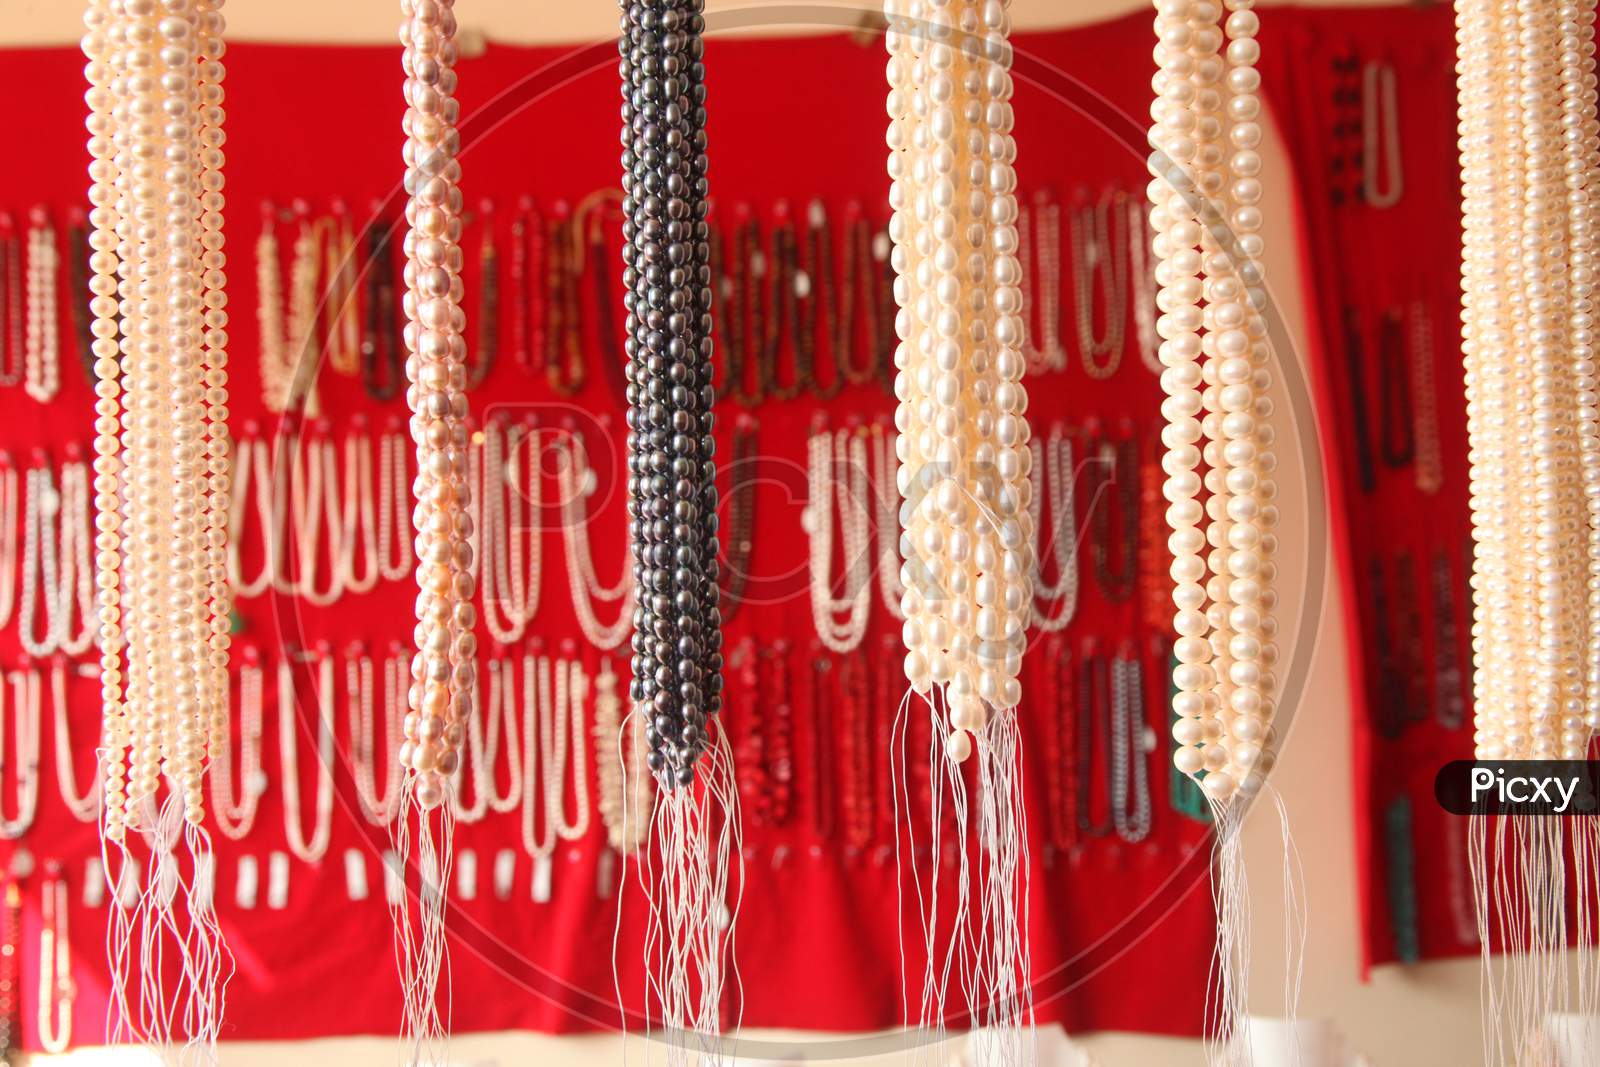 Selective Focus on Hanging Pearl Chains